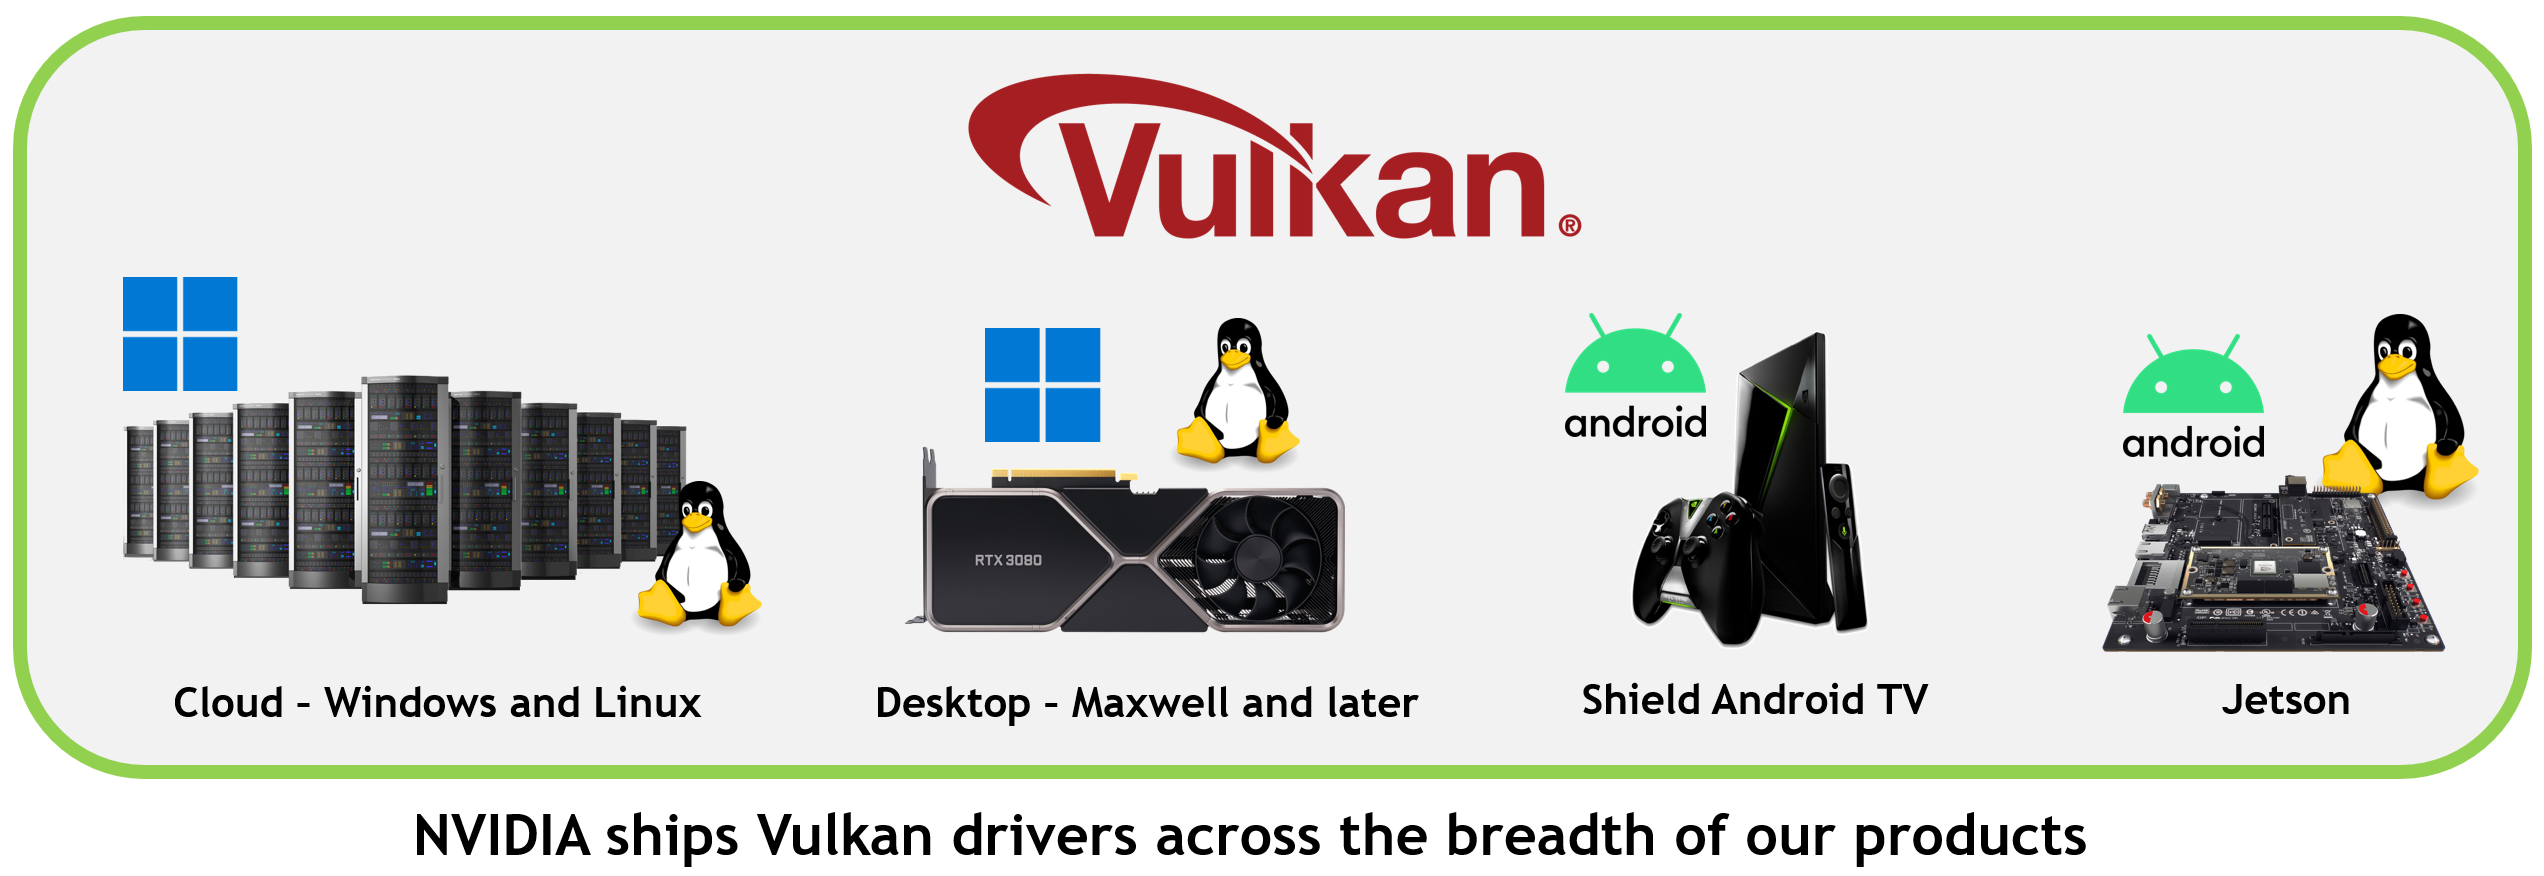 NVIDIA ships Vulkan drivers across different products